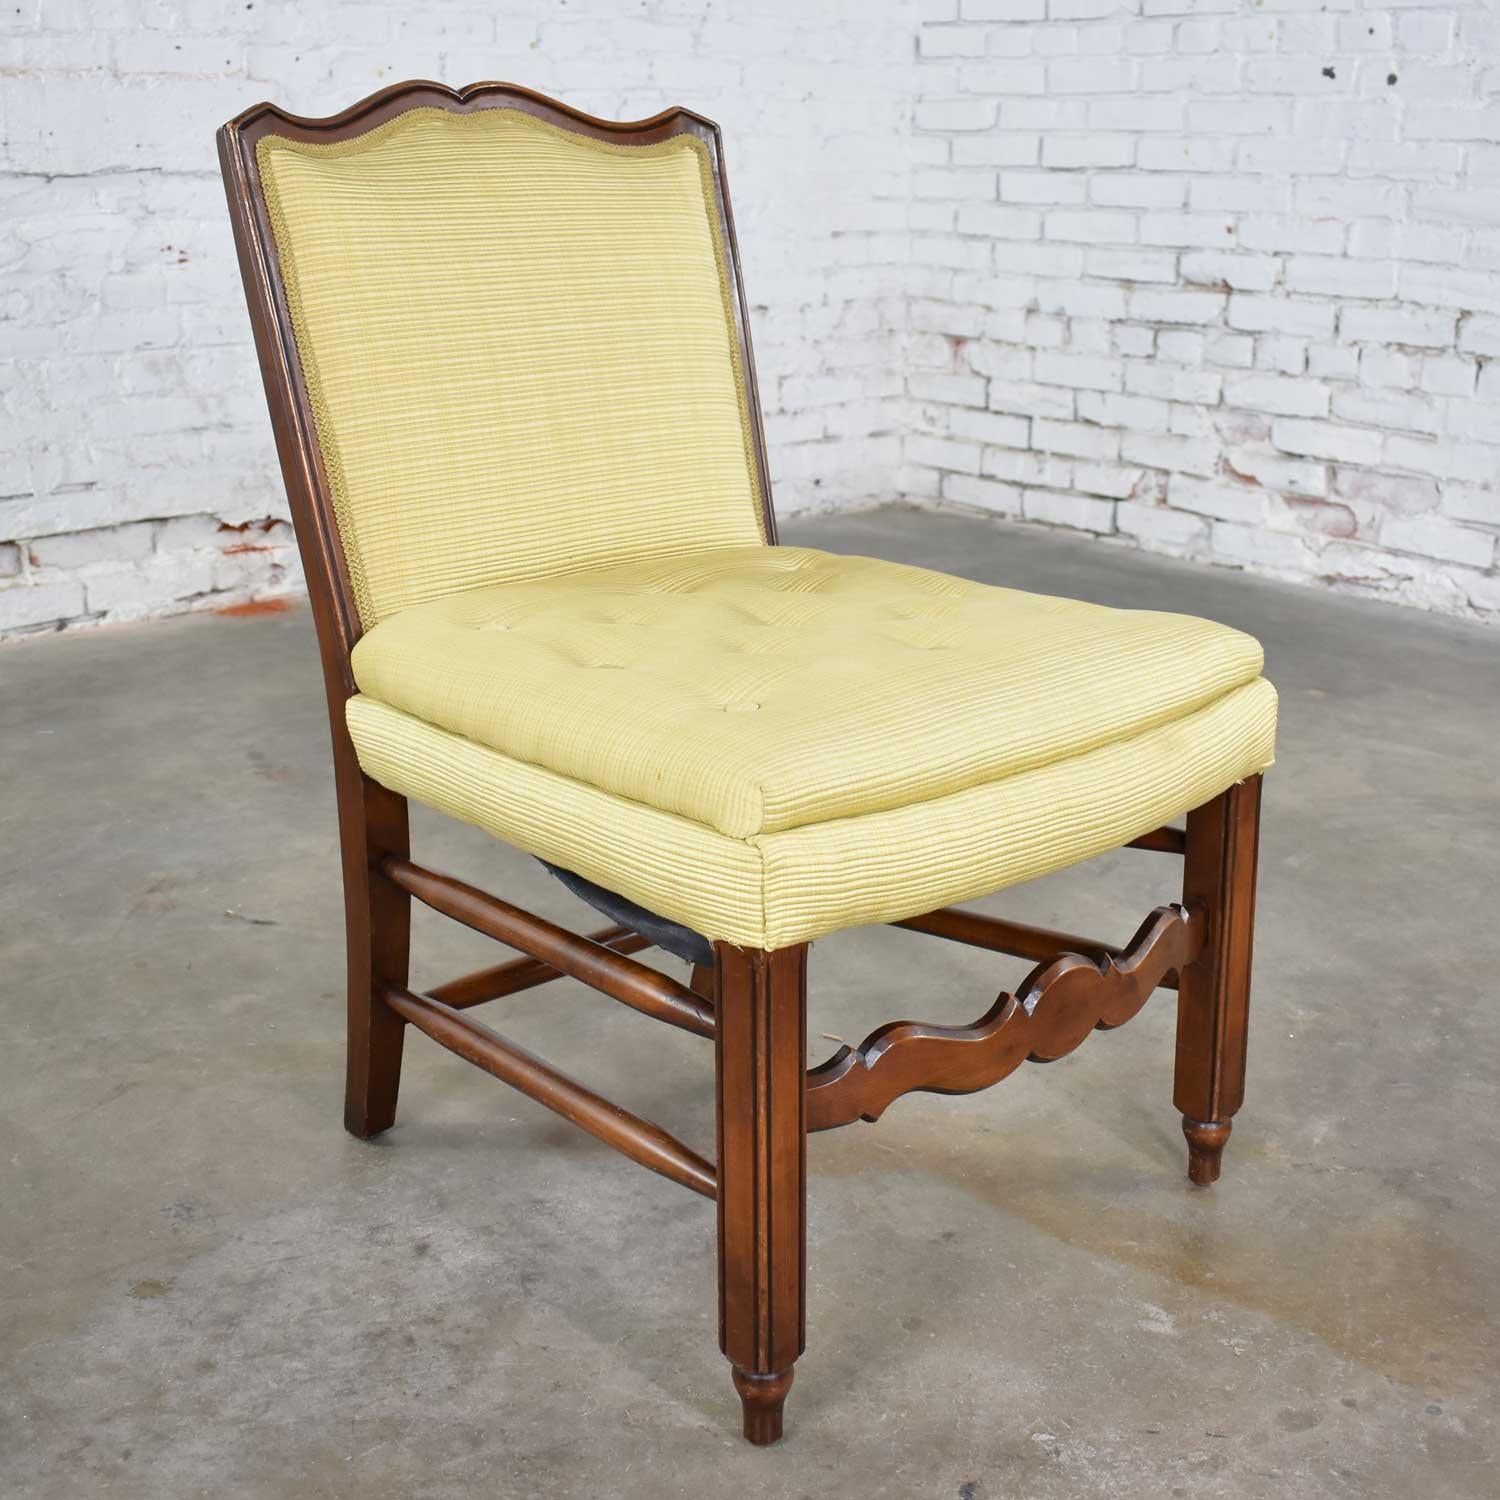 Pair of Georgian Revival His and Hers Accent Chairs in Golden Yellow 5